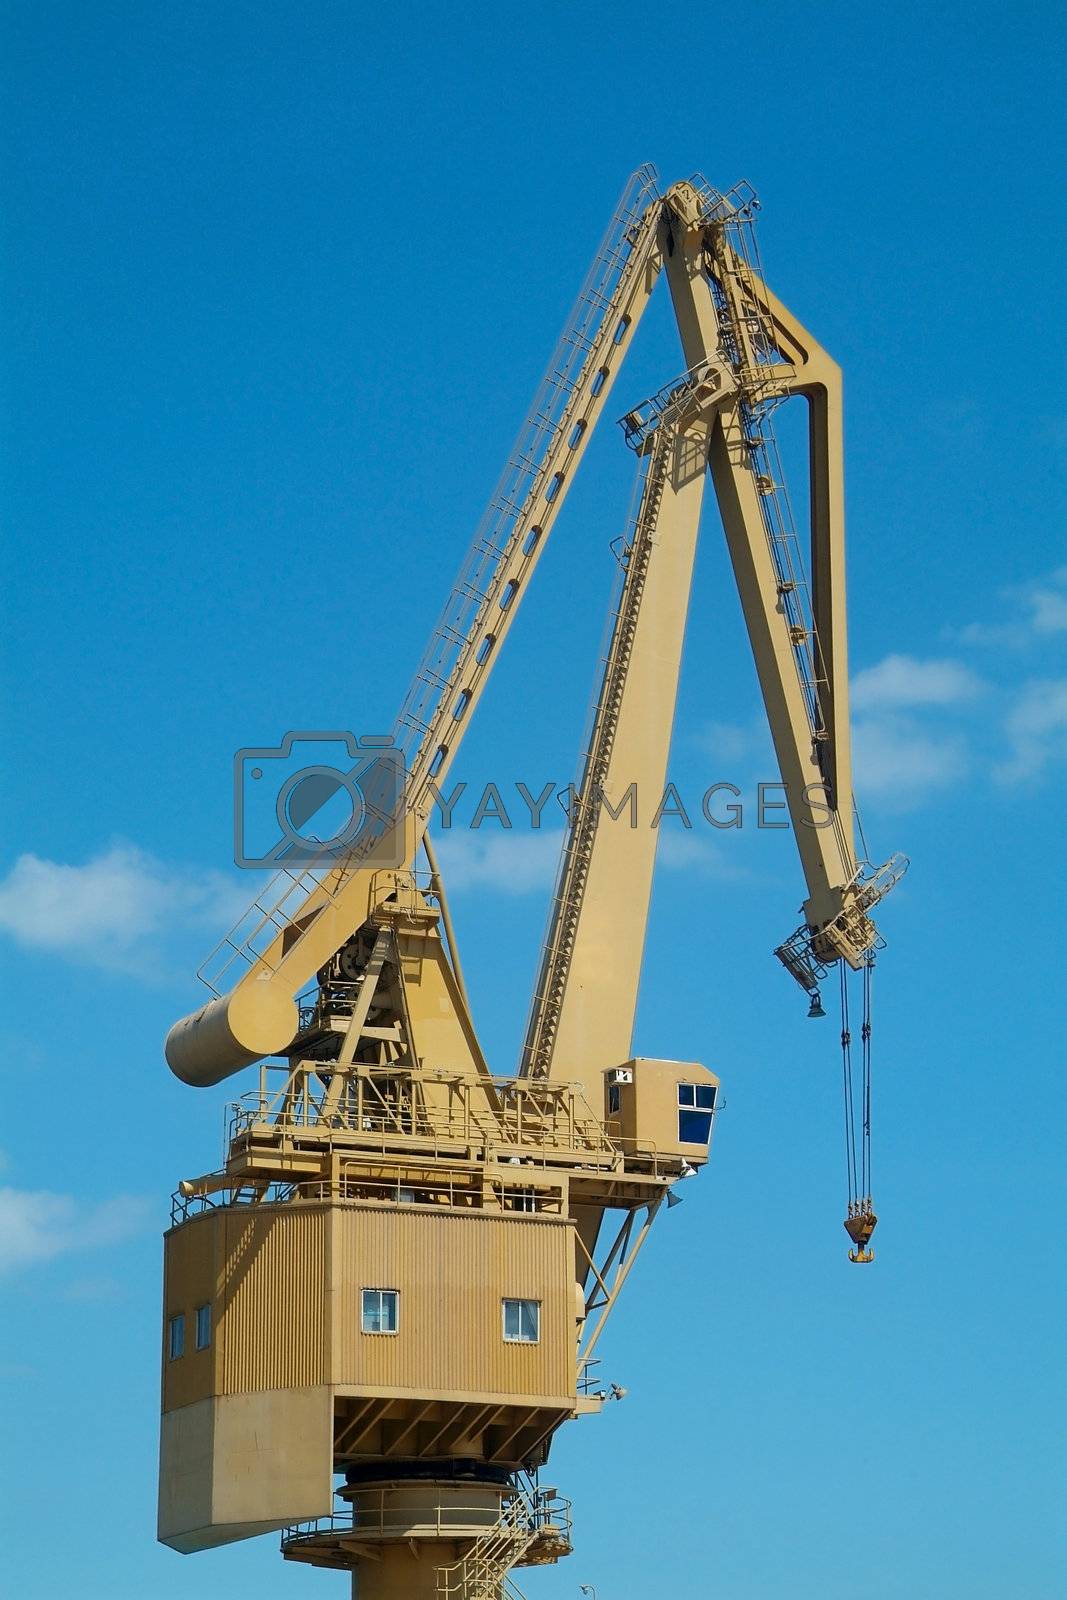 Royalty free image of Yellow harbour crane by epixx